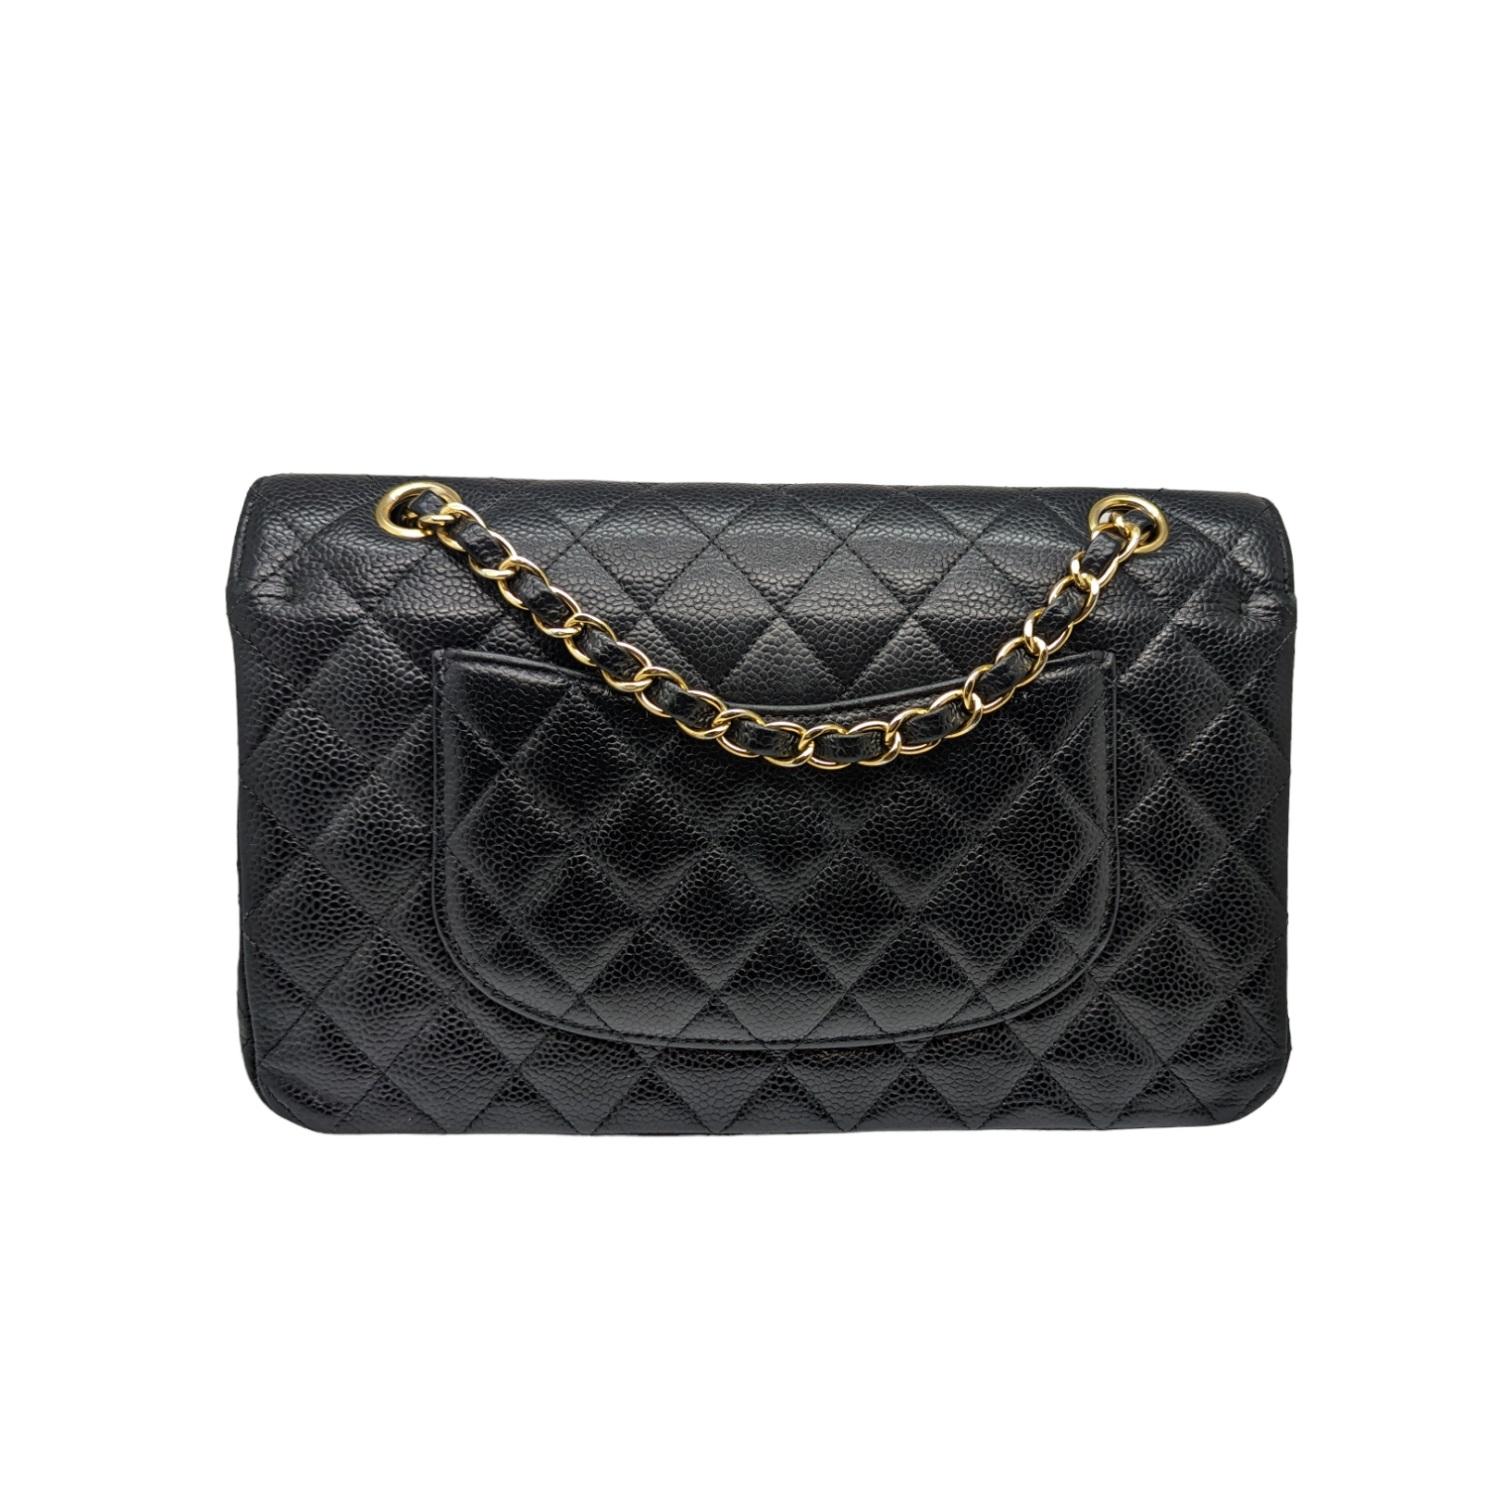 This elegant shoulder bag is crafted of luxurious caviar textured leather in black. The bag features a leather threaded gold chain-link shoulder strap, a rear patch pocket, and a crossover flap with a gold classic CC turn lock. The flap opens to